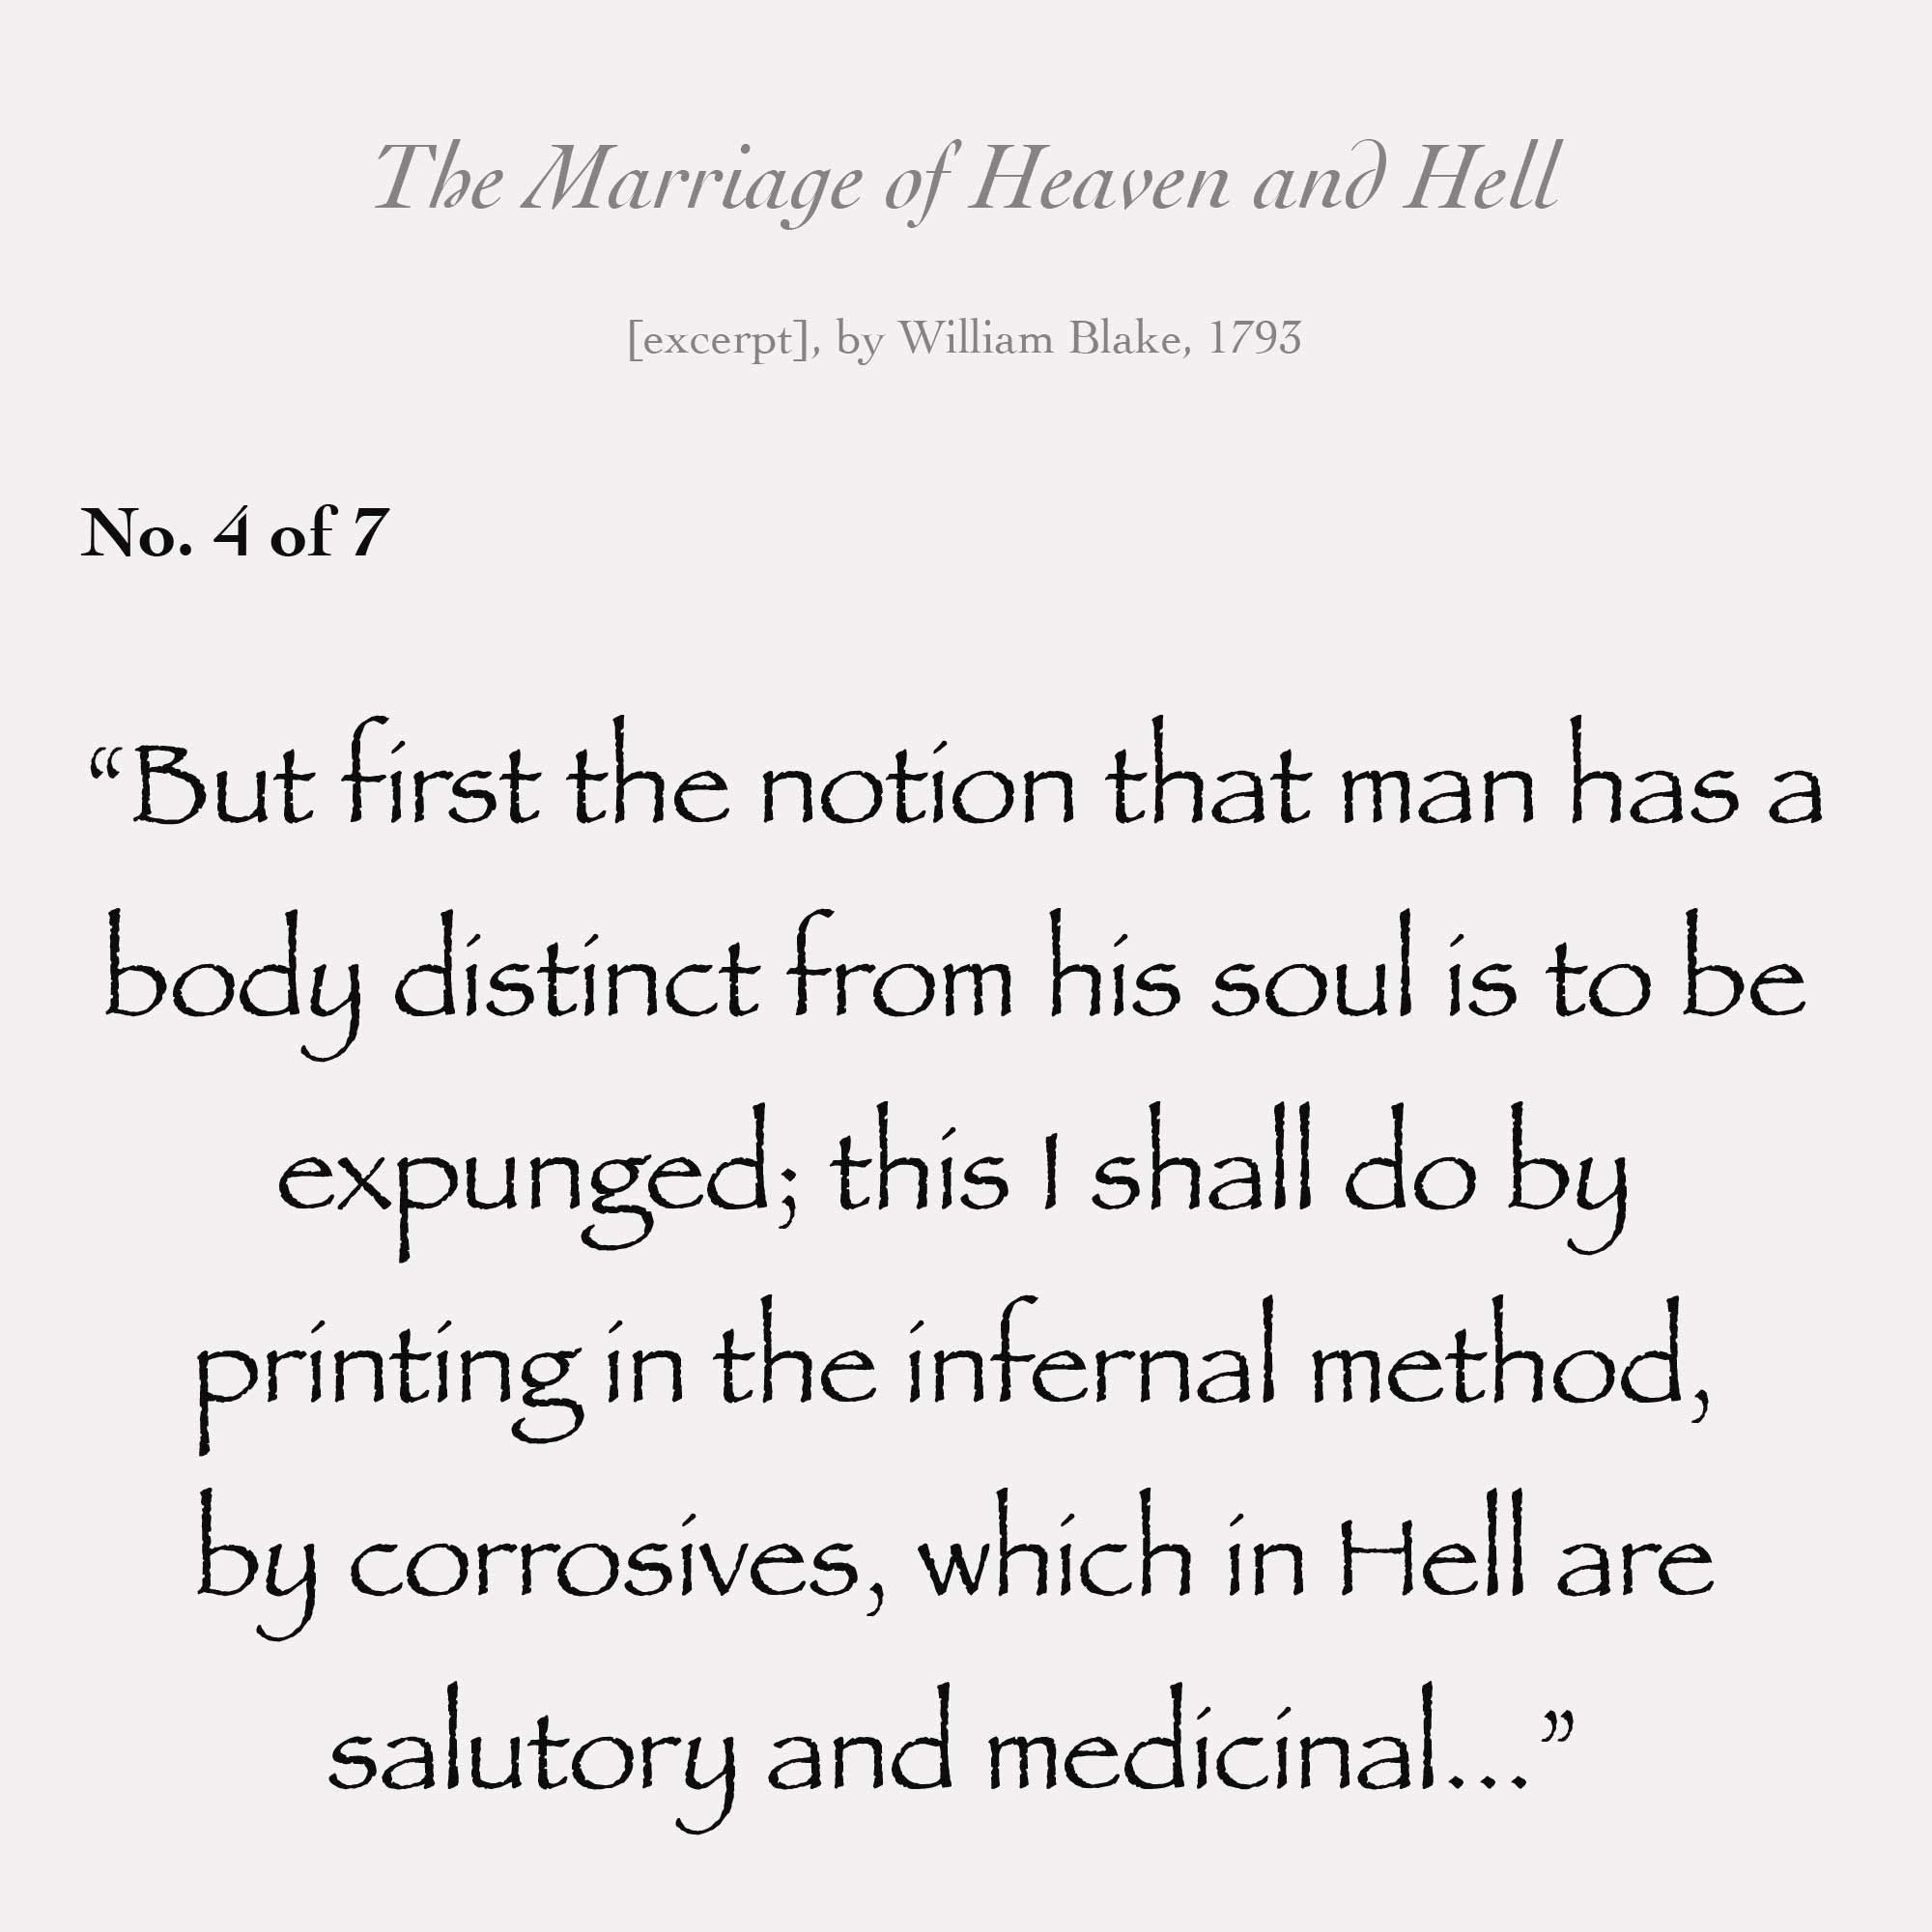 “But first the notion that man has a body distinct from his soul is to be expunged; this I shall do by printing in the infernal method, by corrosives, which in Hell are salutory and medicinal...”